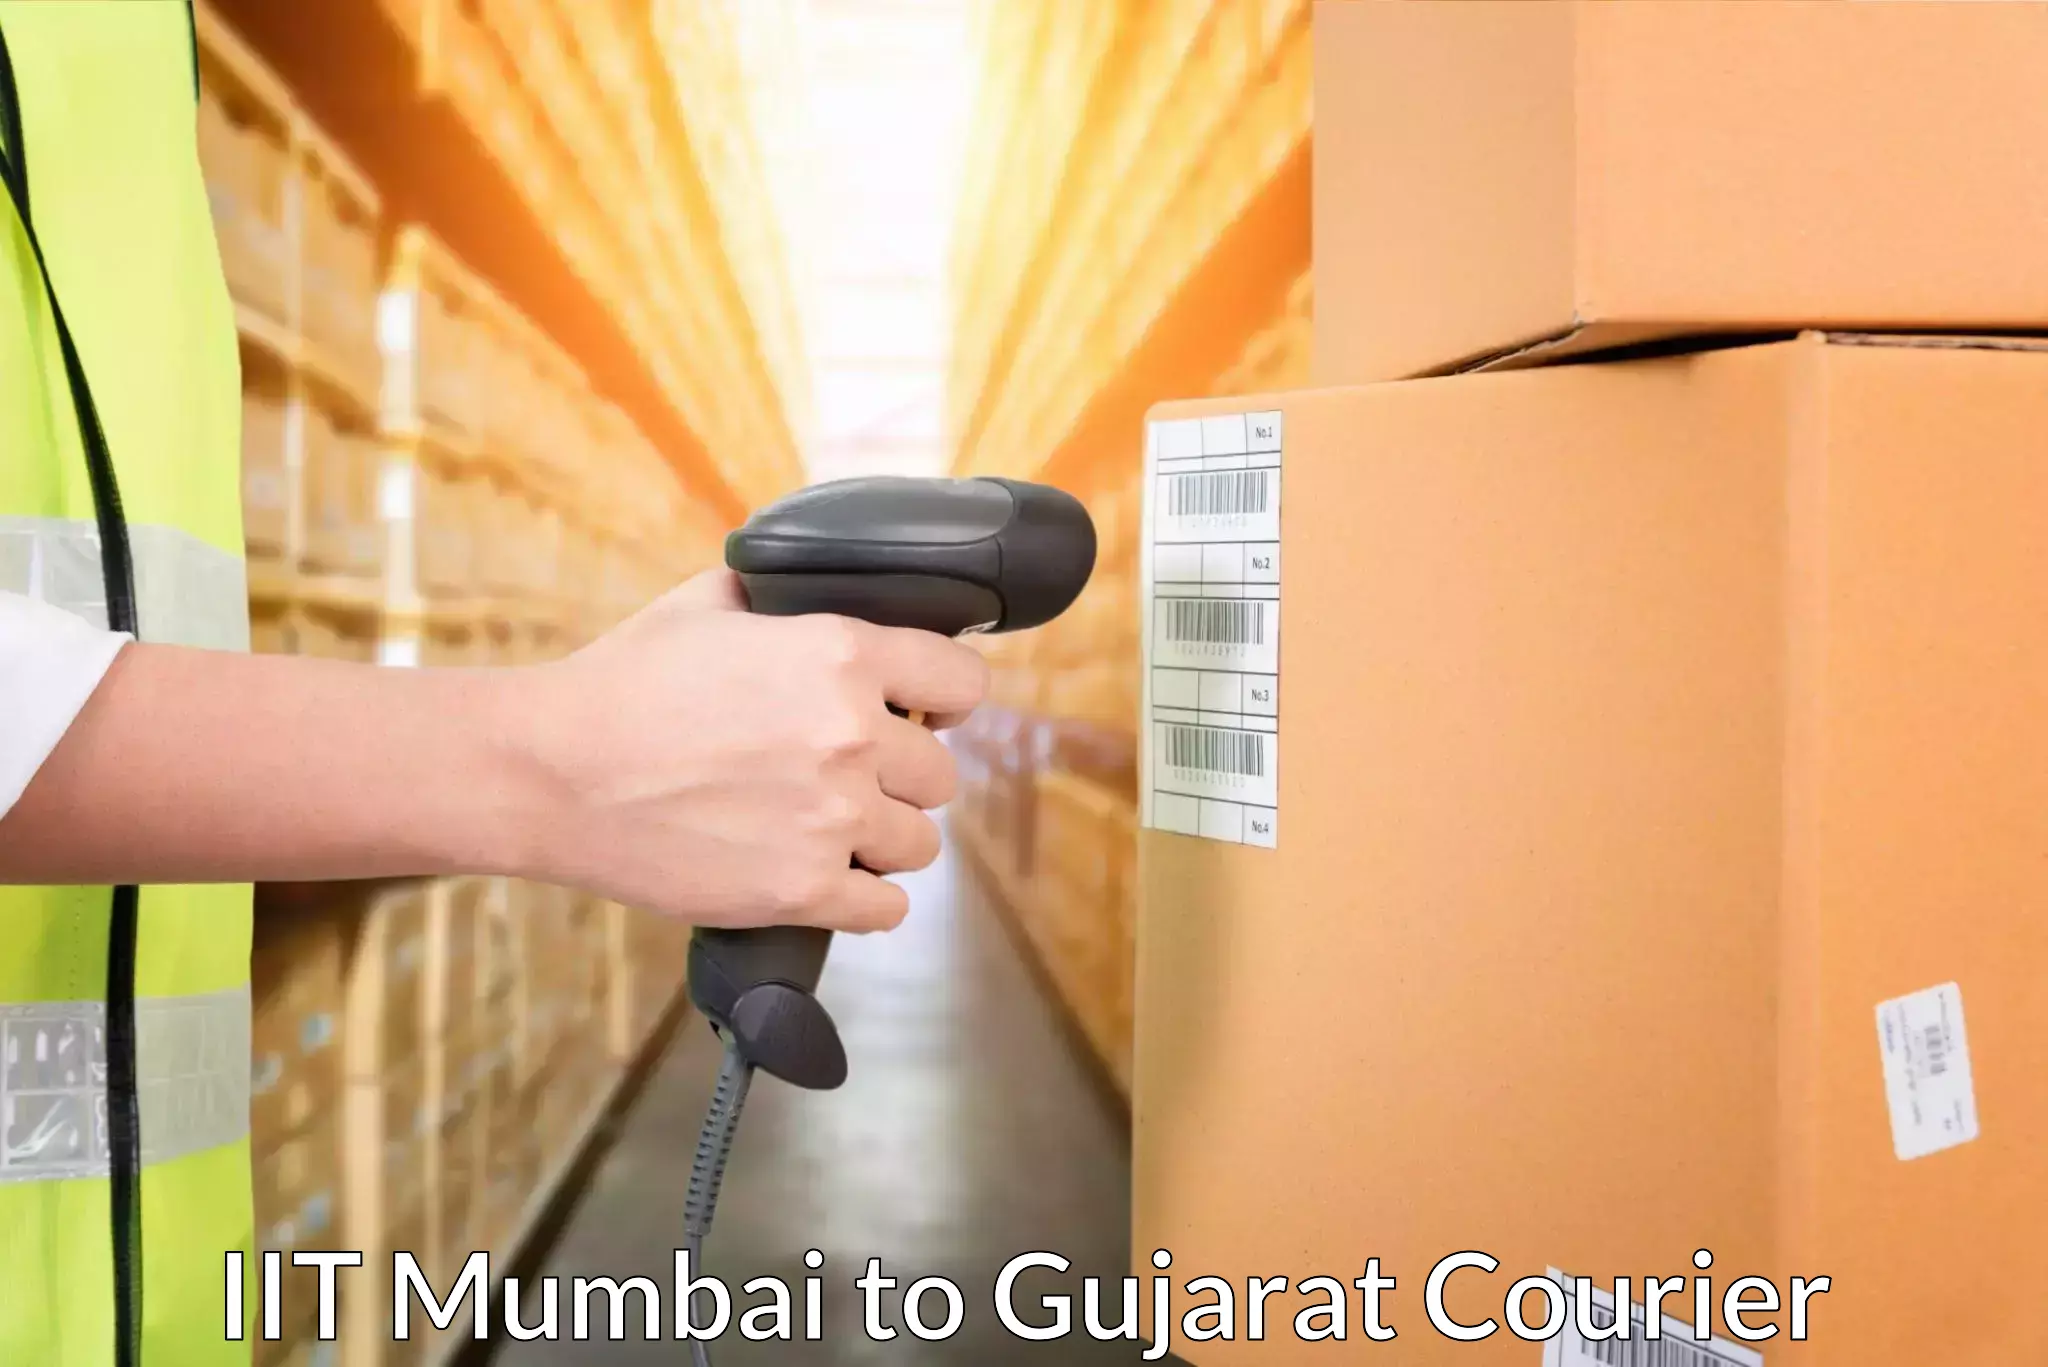 Next-day freight services IIT Mumbai to Ahmedabad